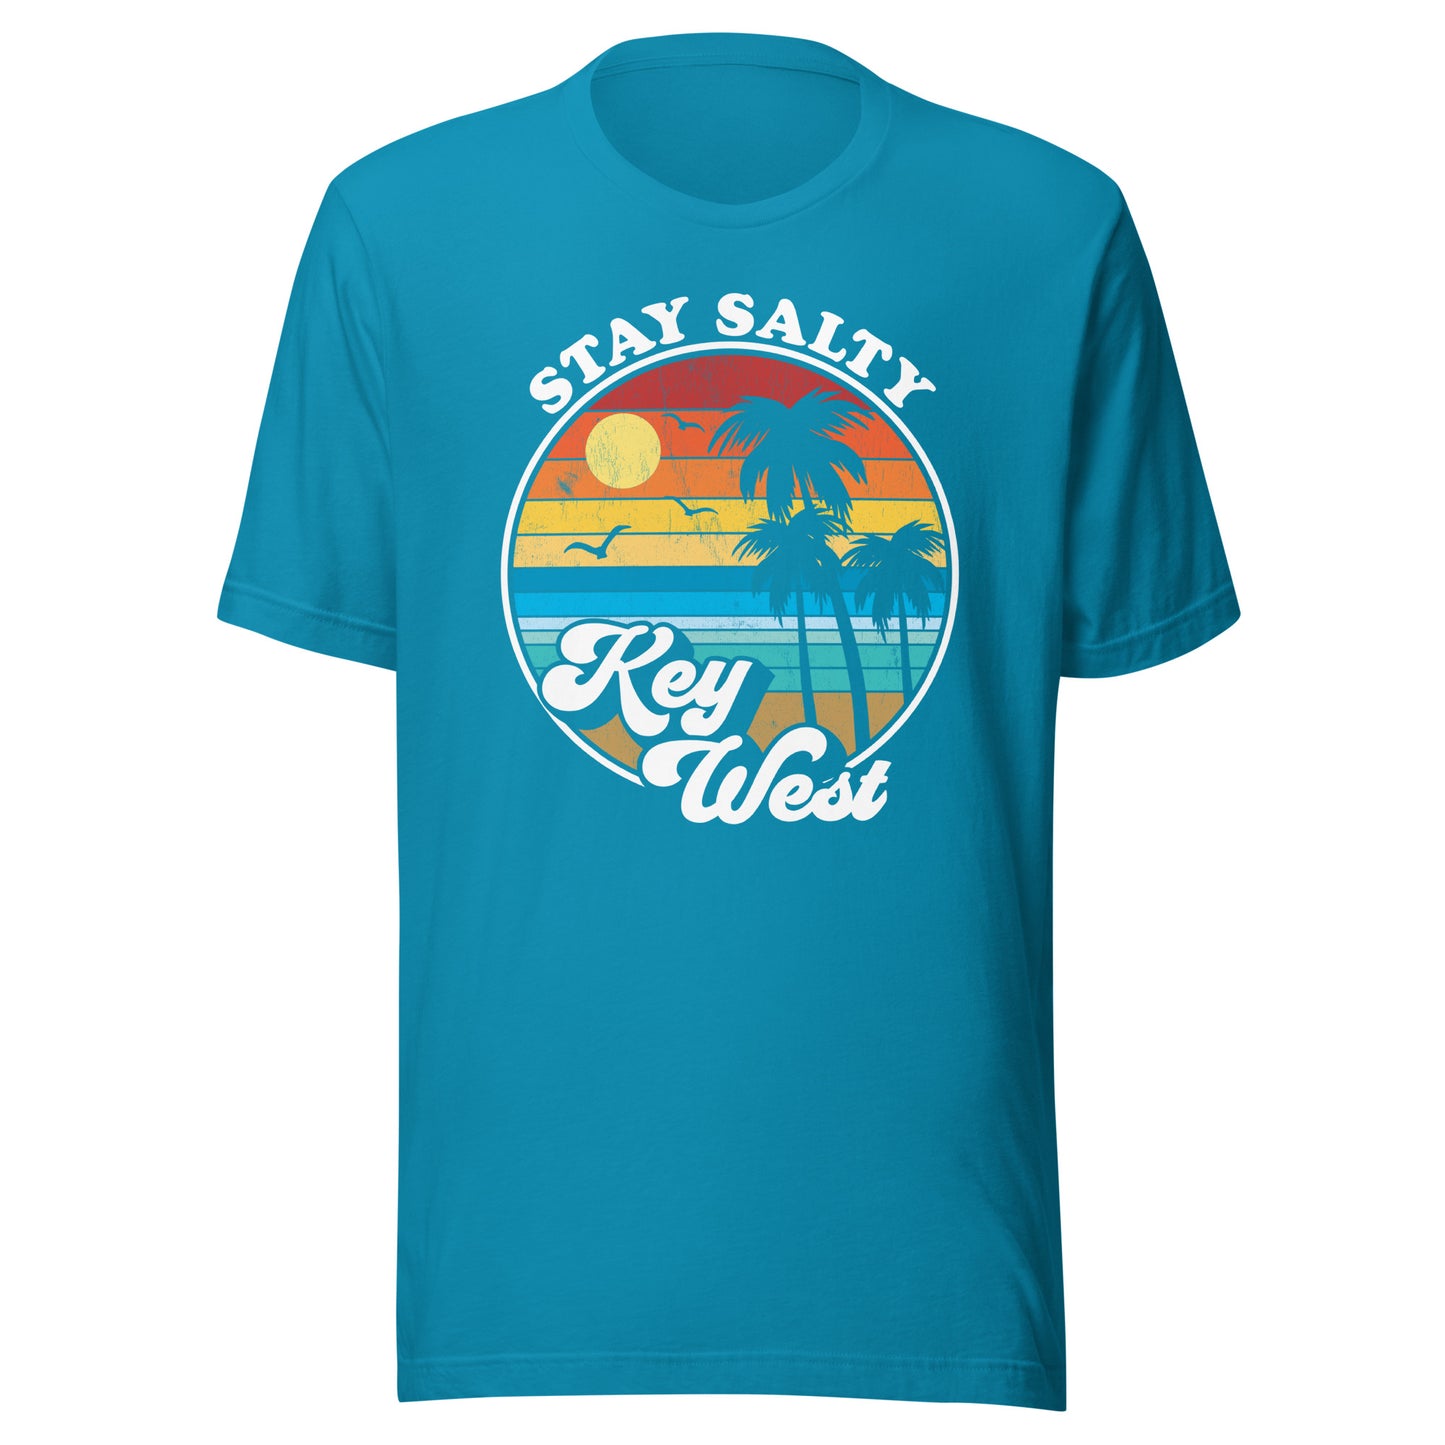 Stay Salty Key West Sunset